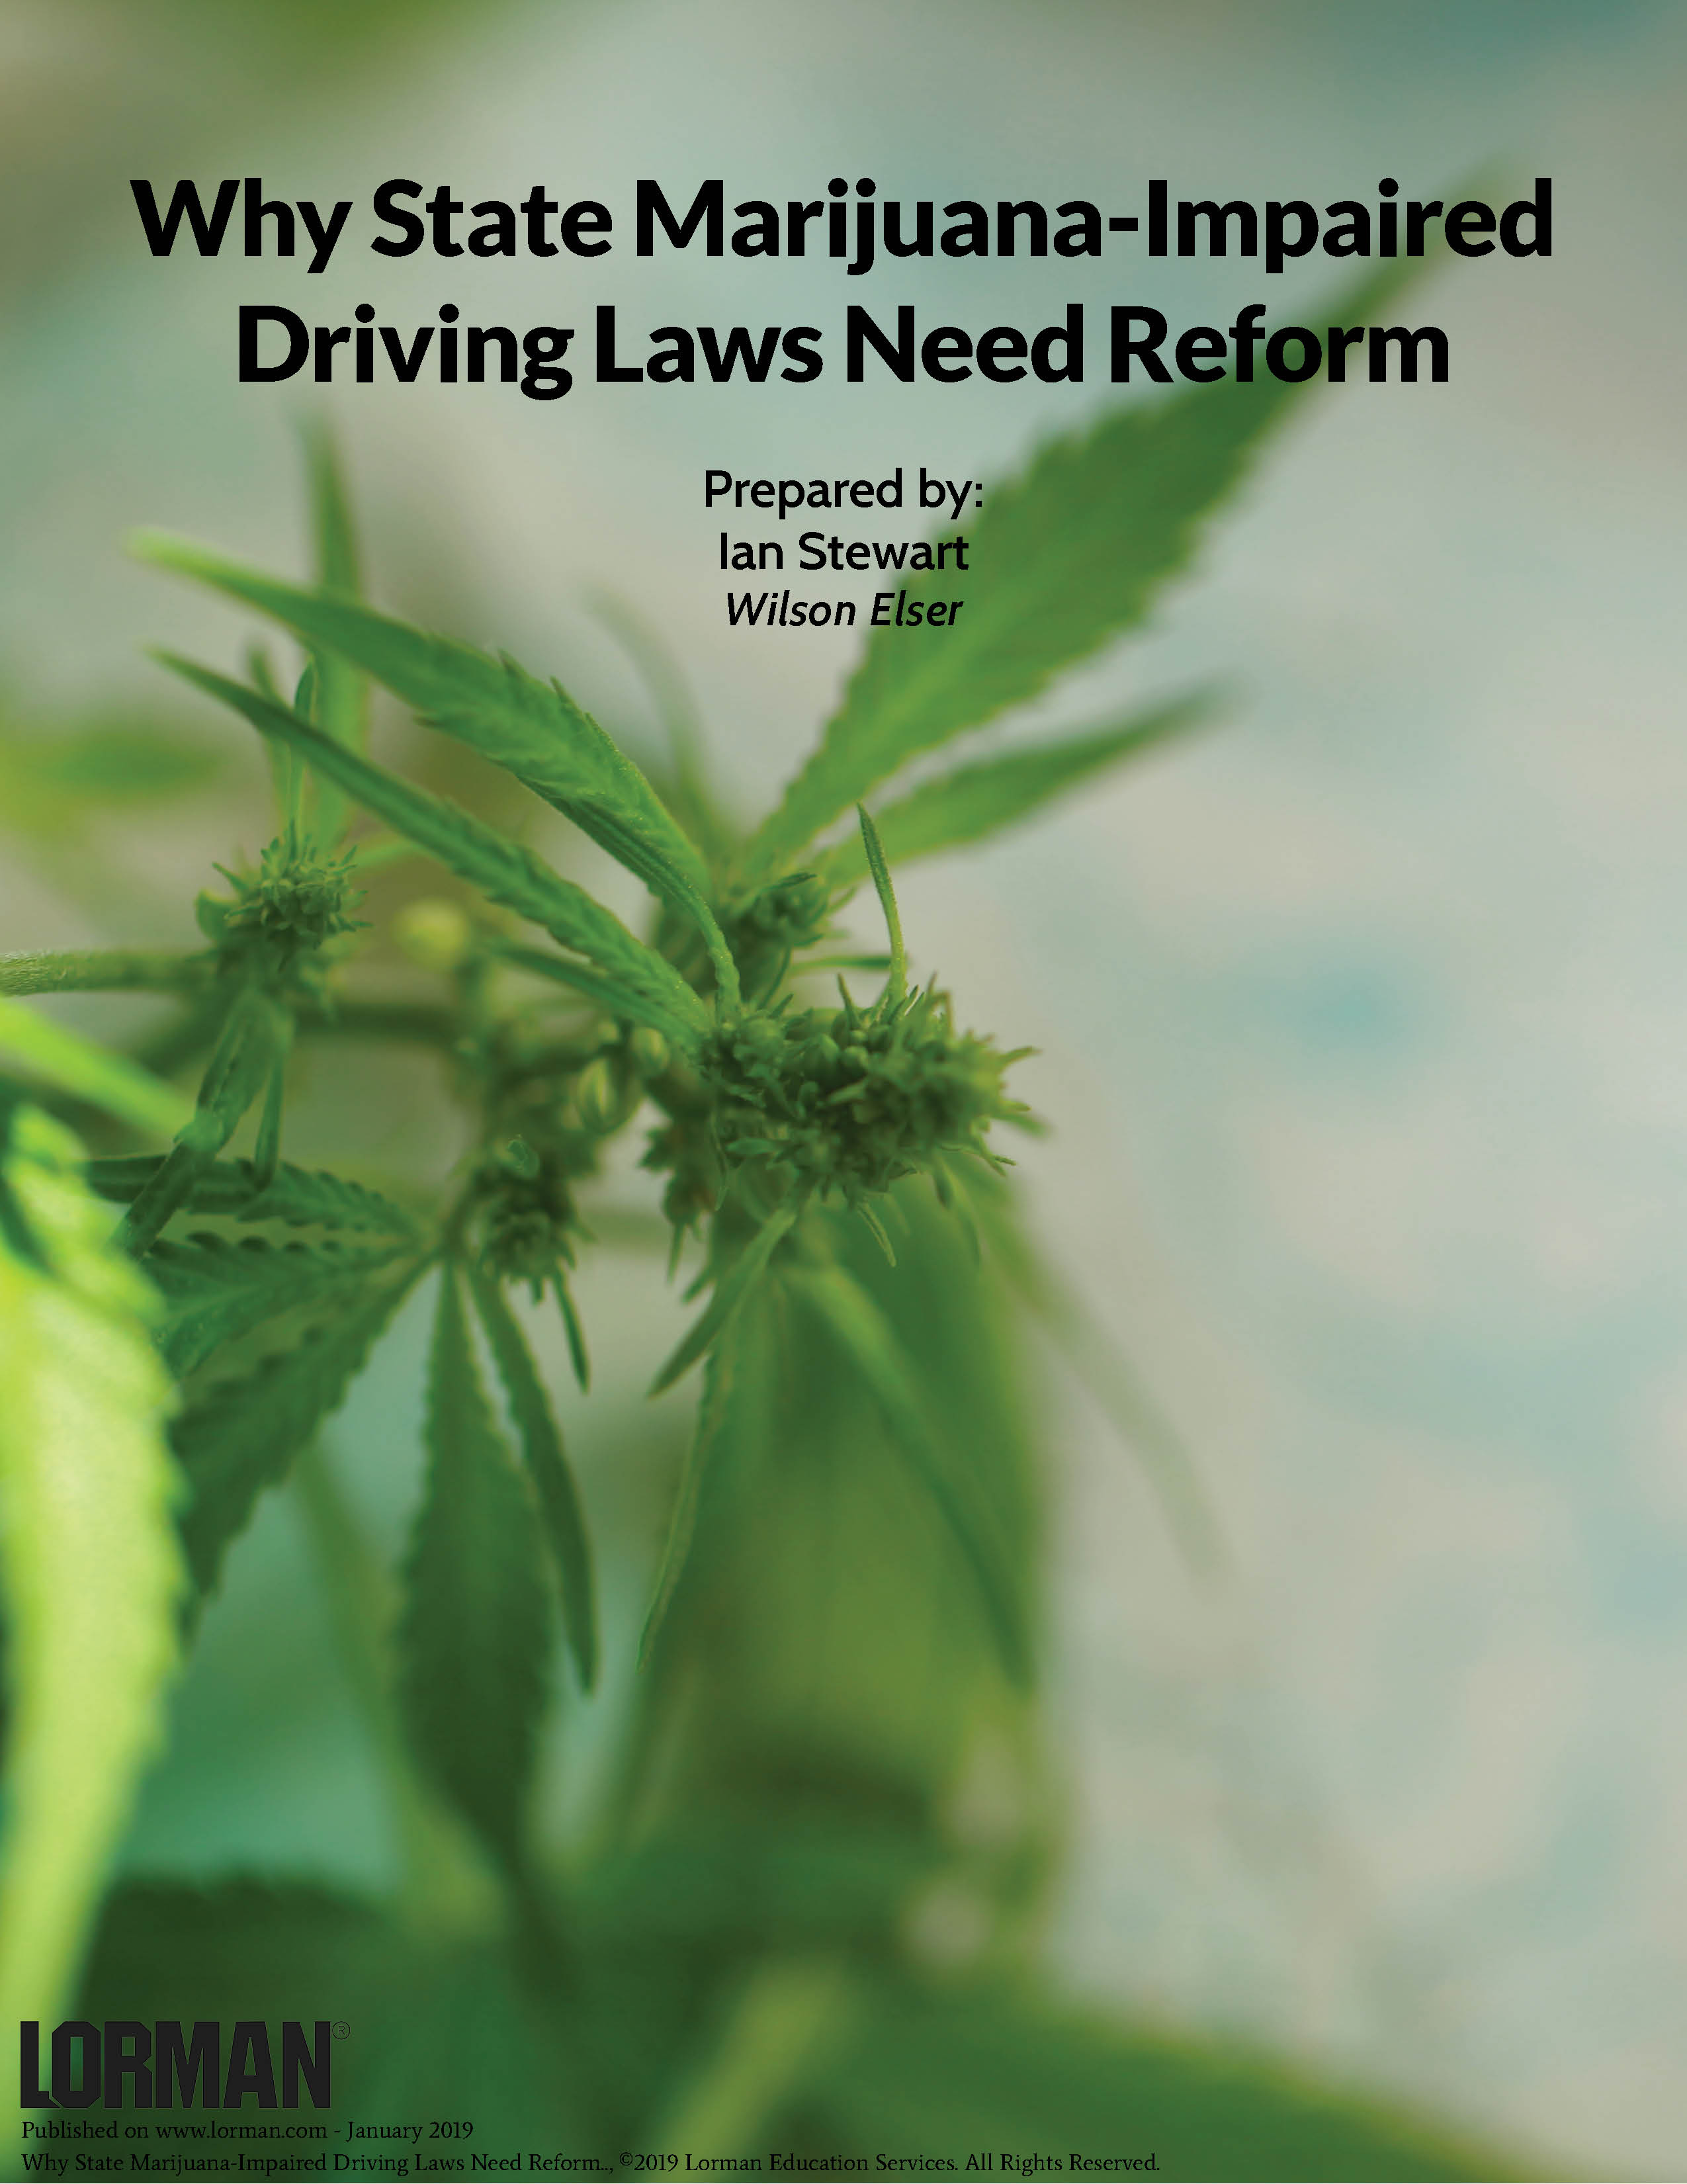 Why State Marijuana-Impaired Driving Laws Need Reform